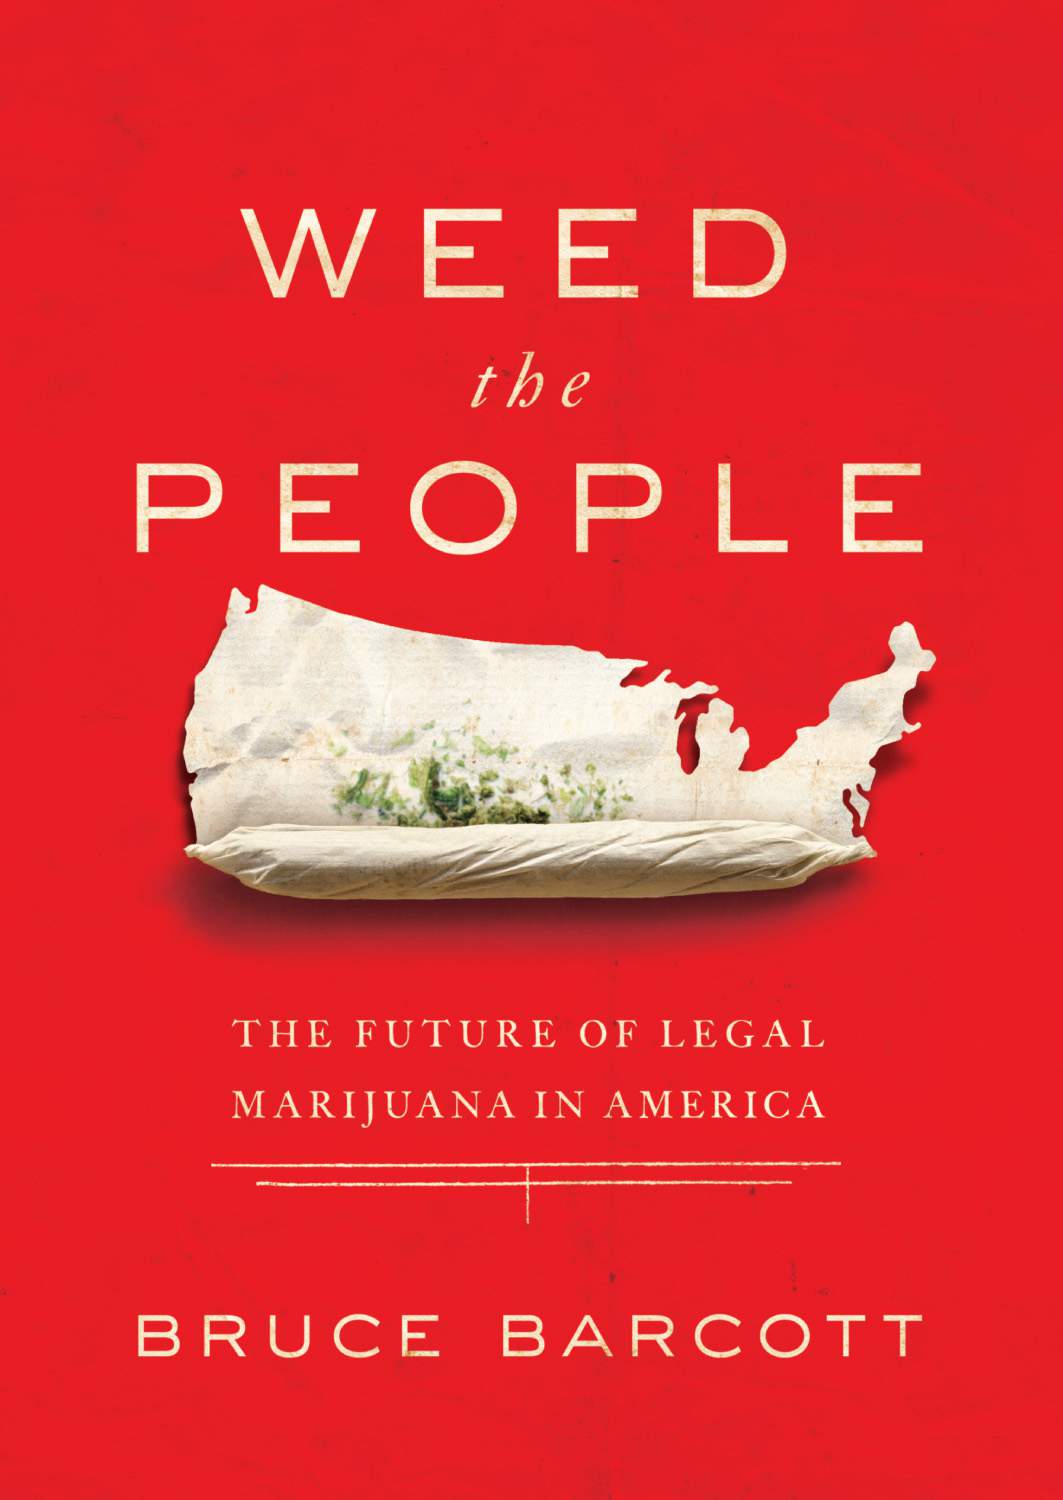 Image of Bruce Barcott's book, Weed the People